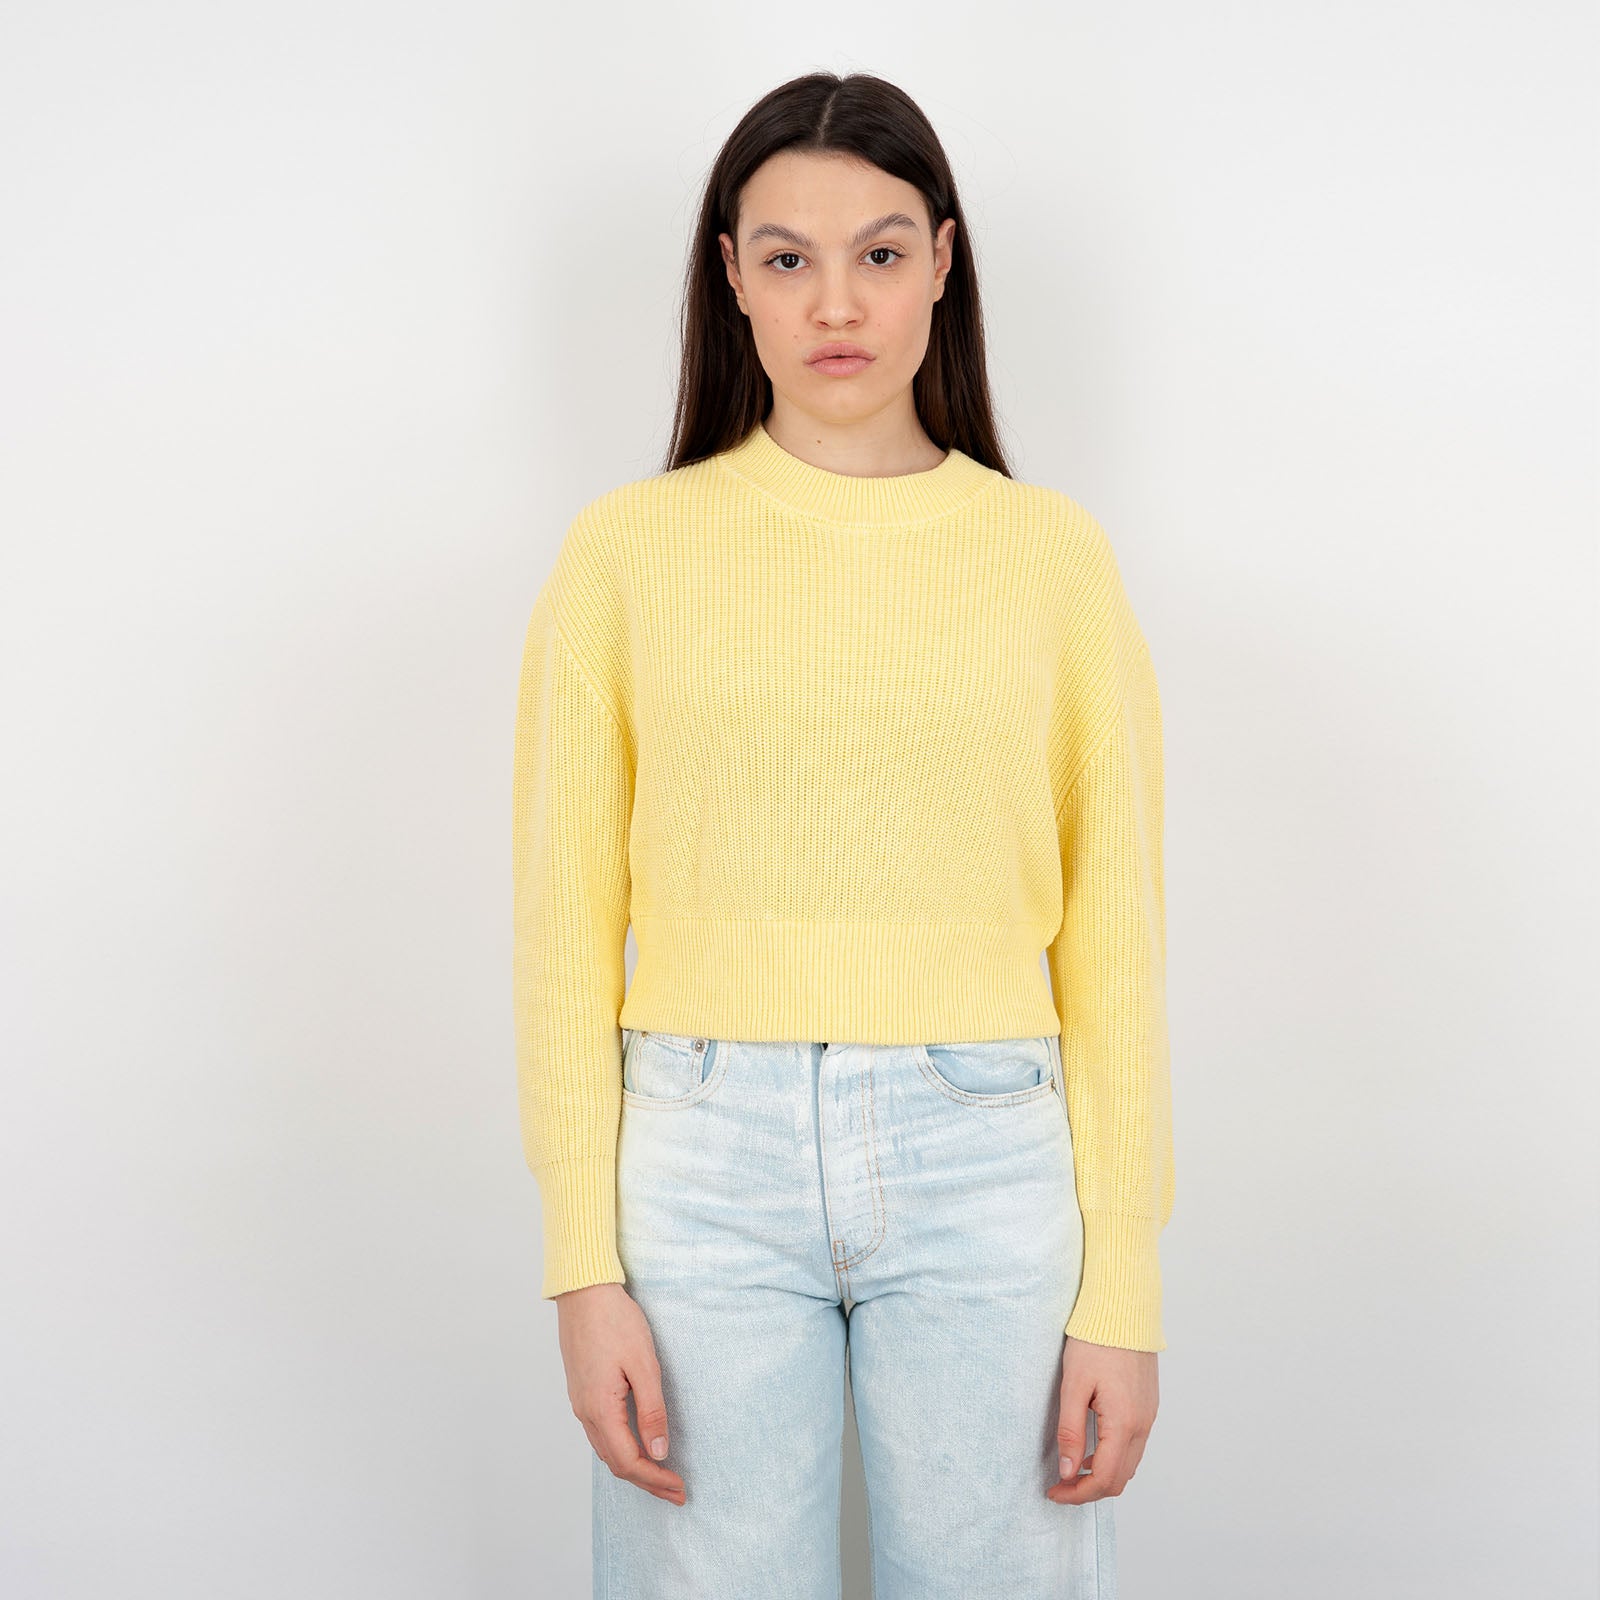 Absolut Cashmere Edith Cotton Yellow Sweater - 6